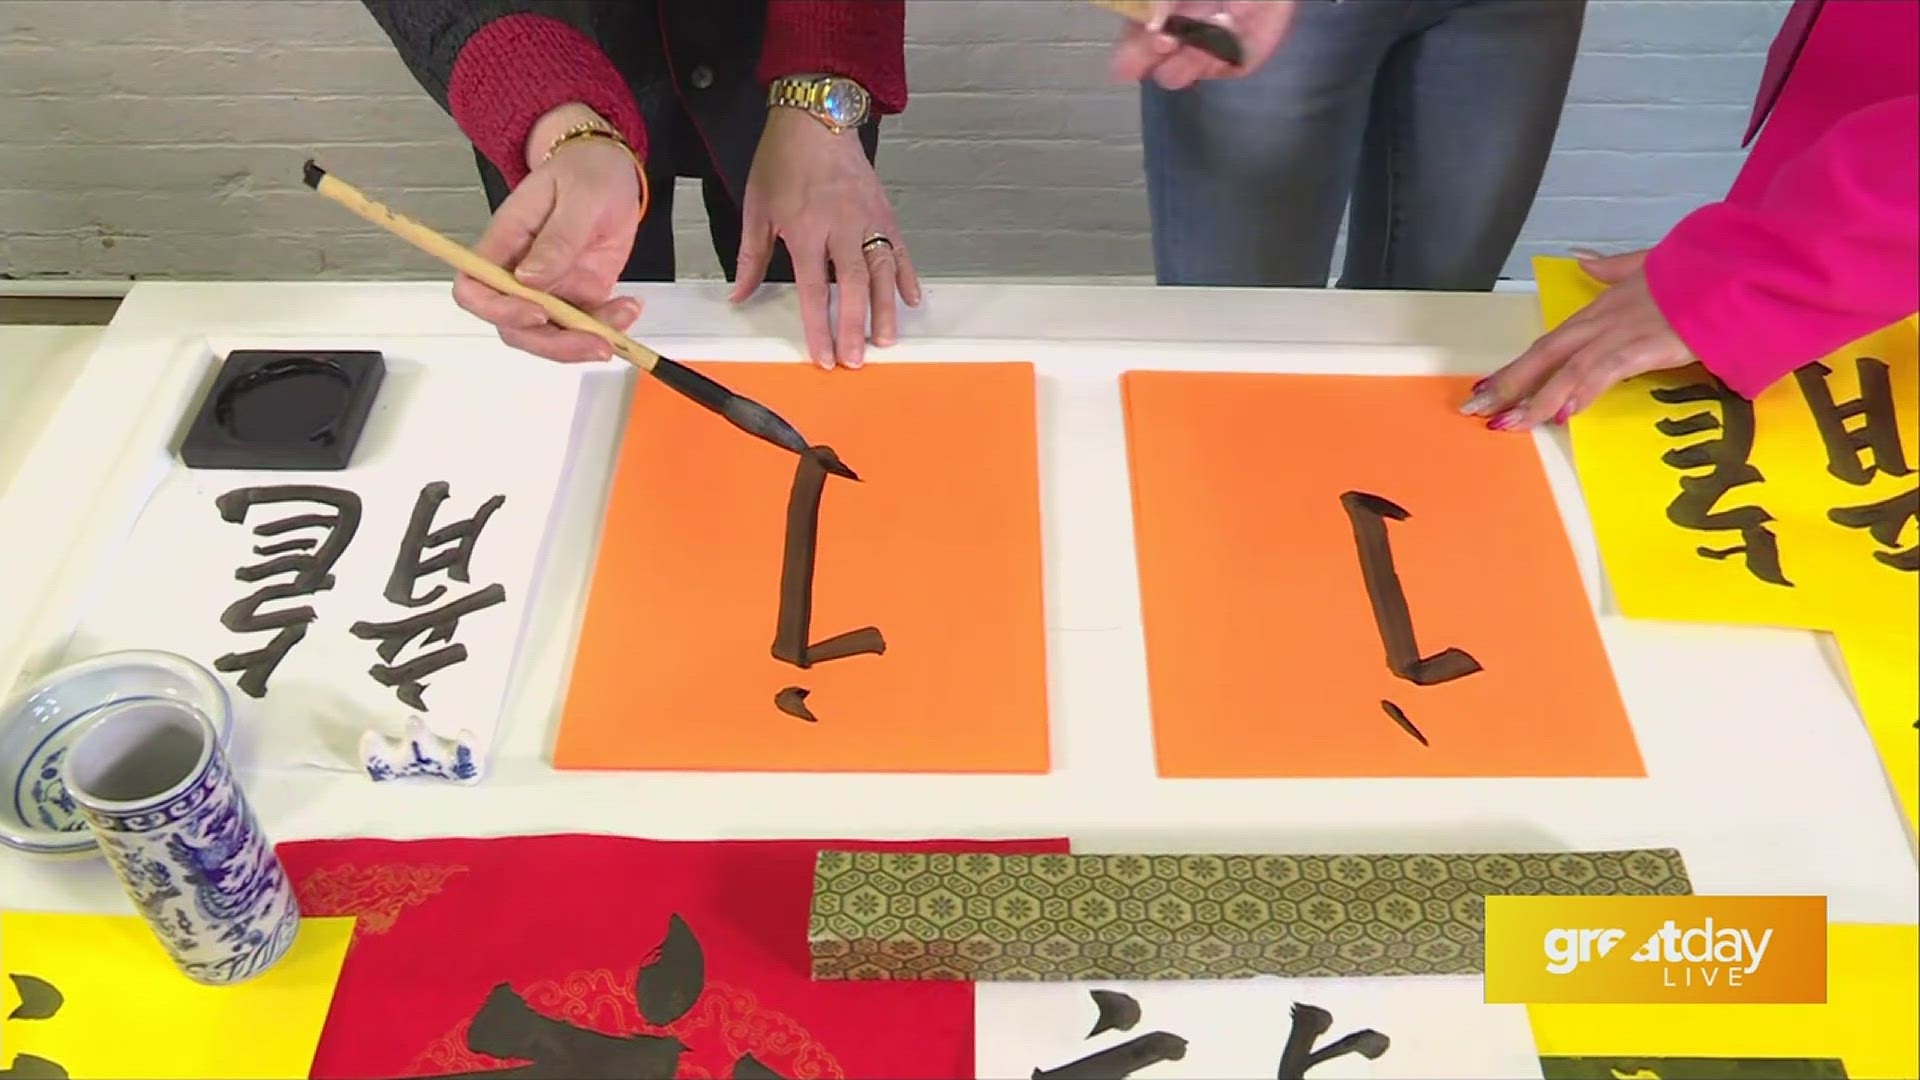 Crane House teaches our reporter, Elle Bottom, the ancient Asian art of calligraphy